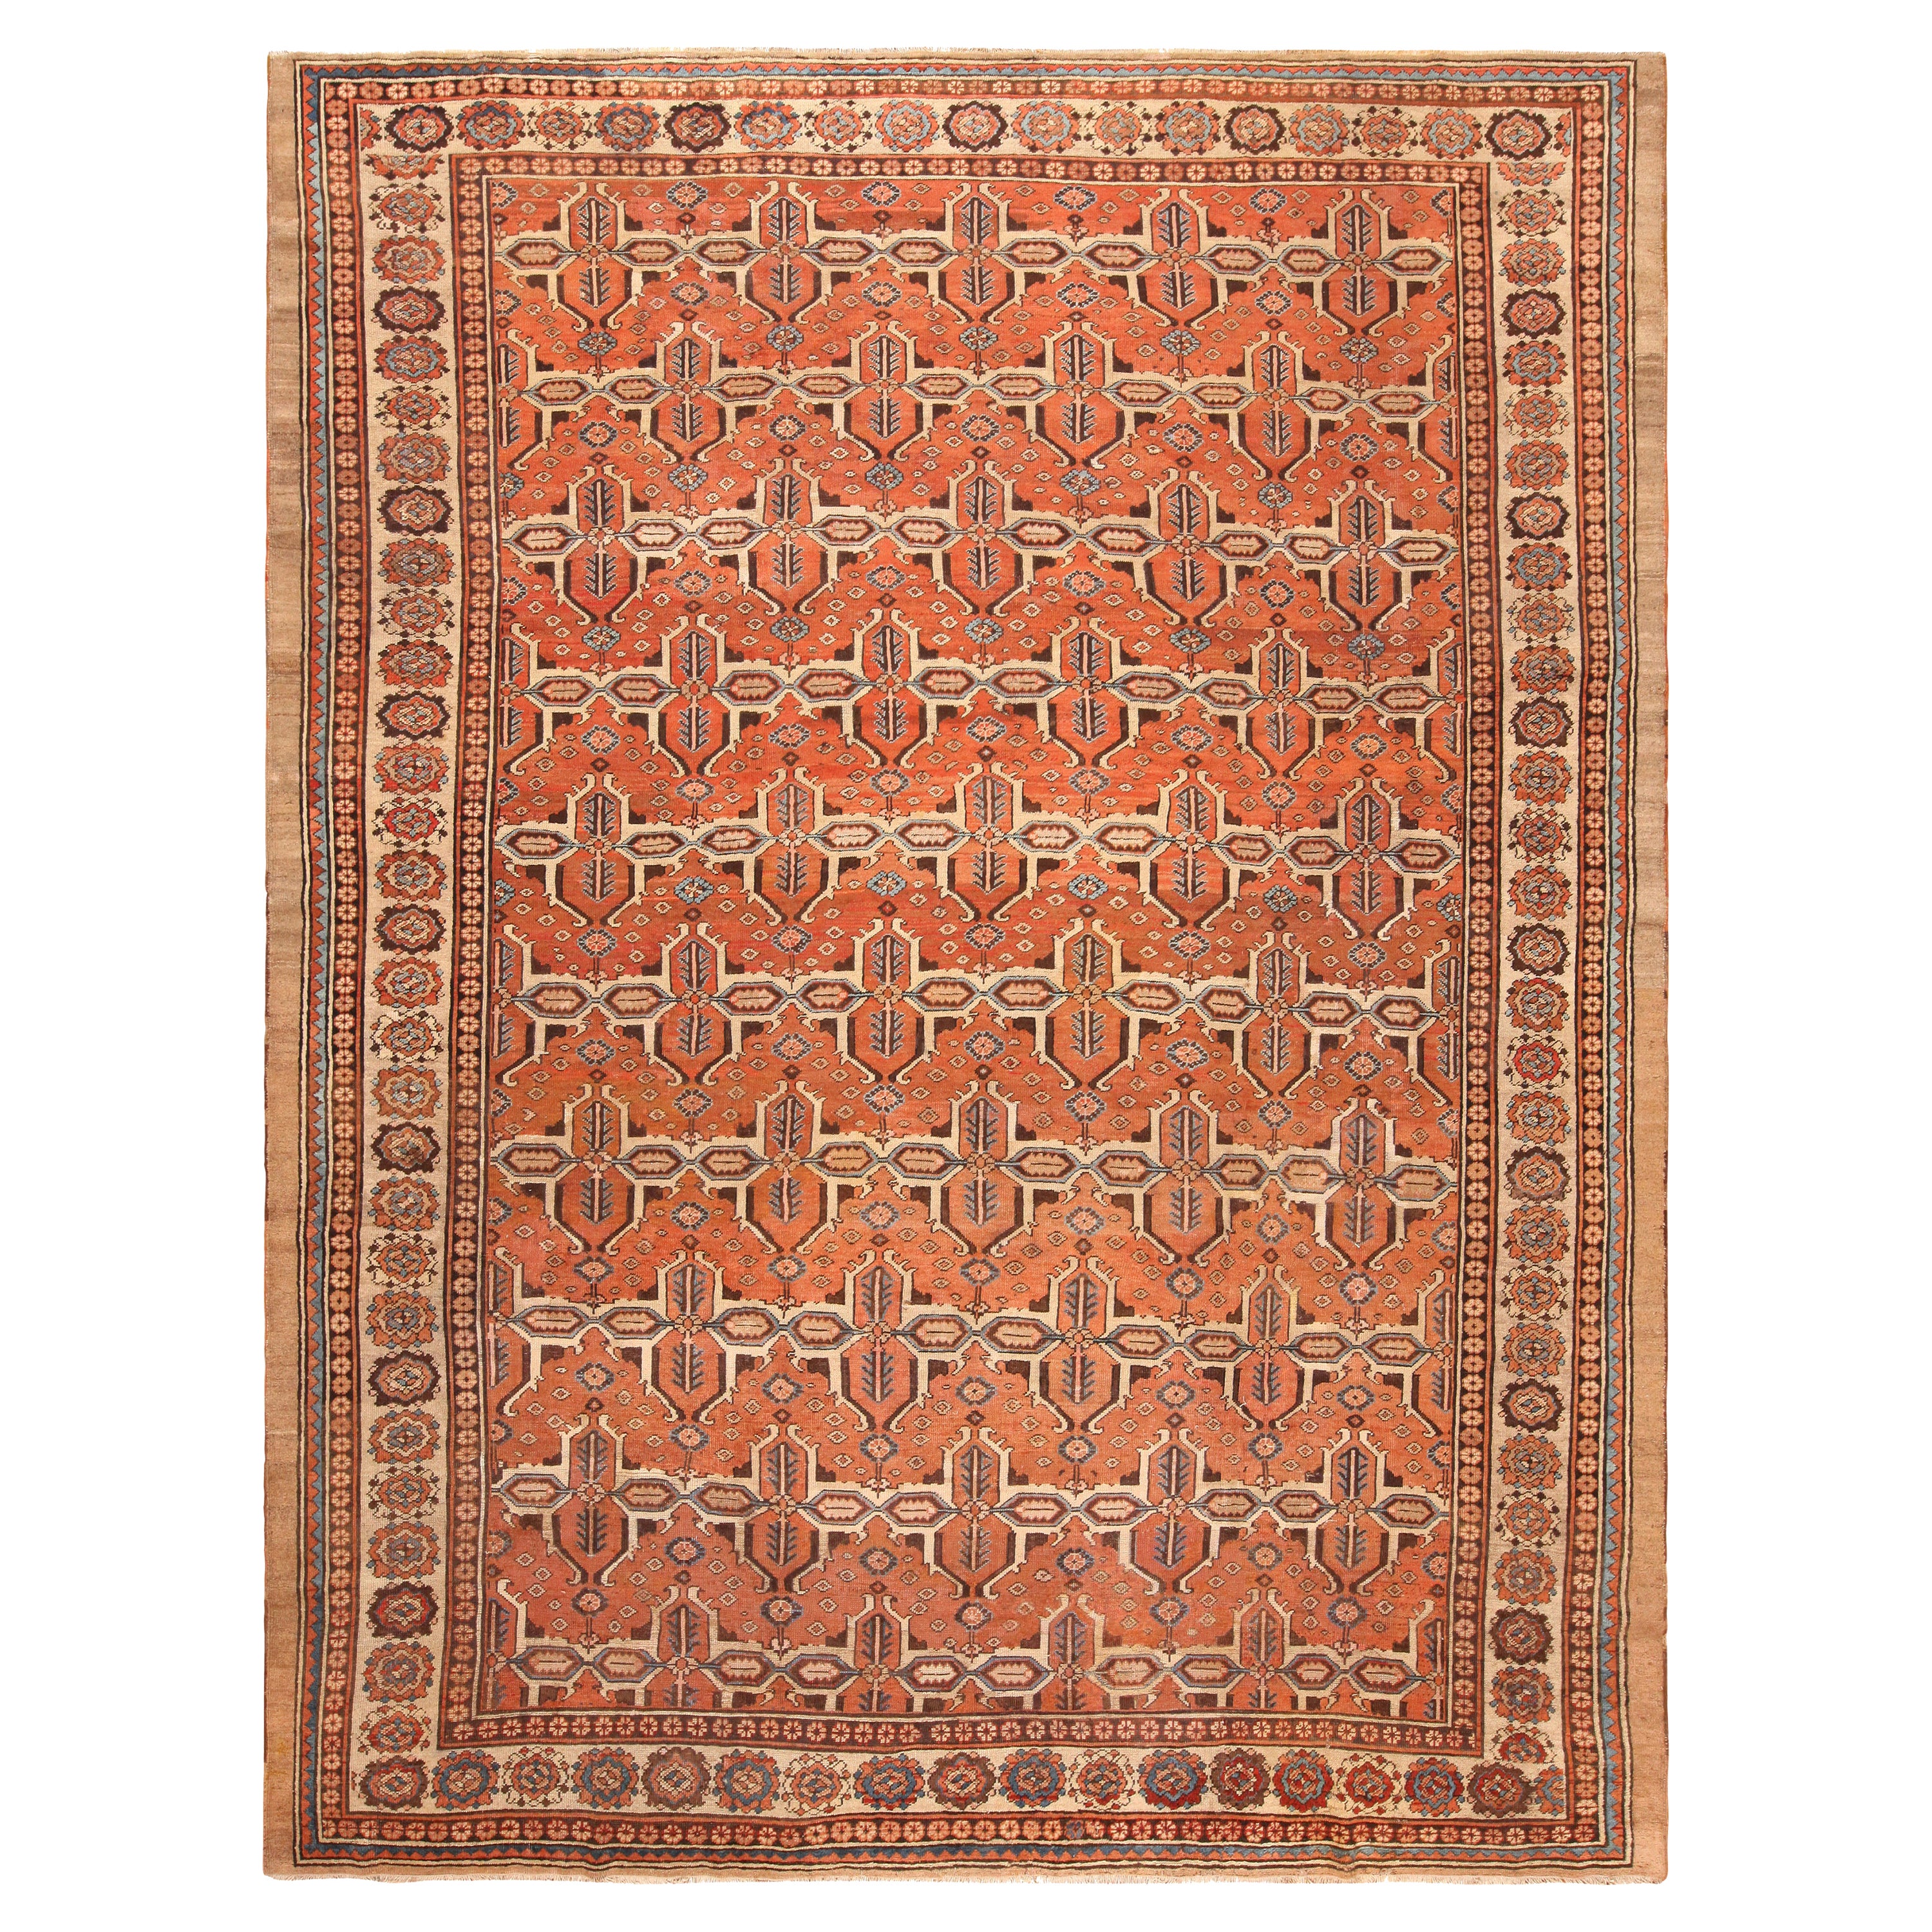 How much does an 8x10 rug cost?